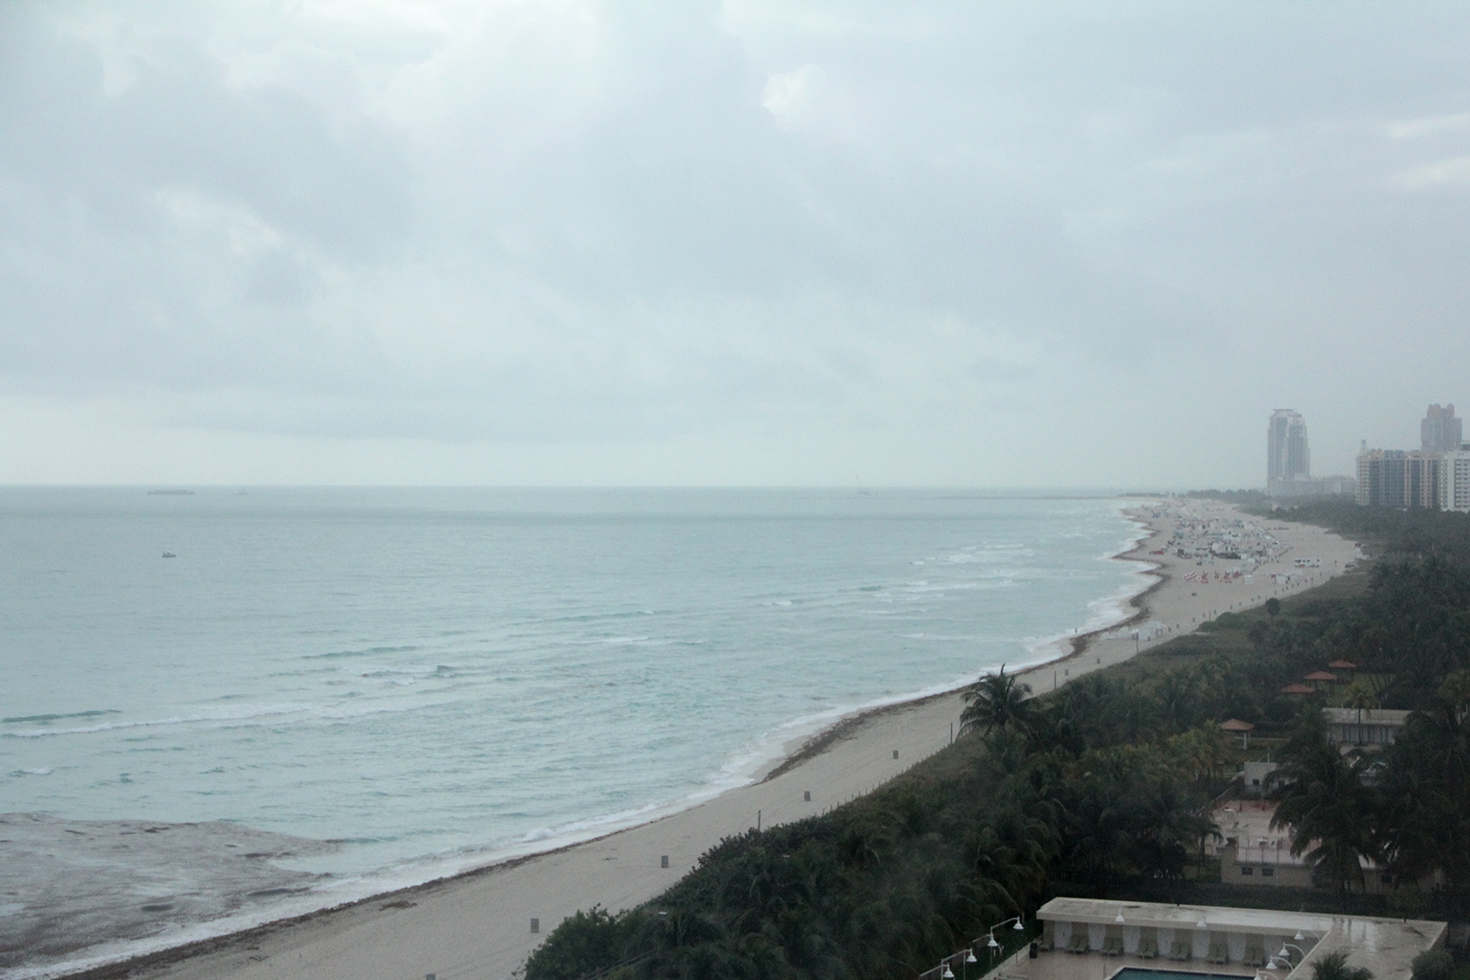 The Miami Beach EDITION: The View from Room 1114